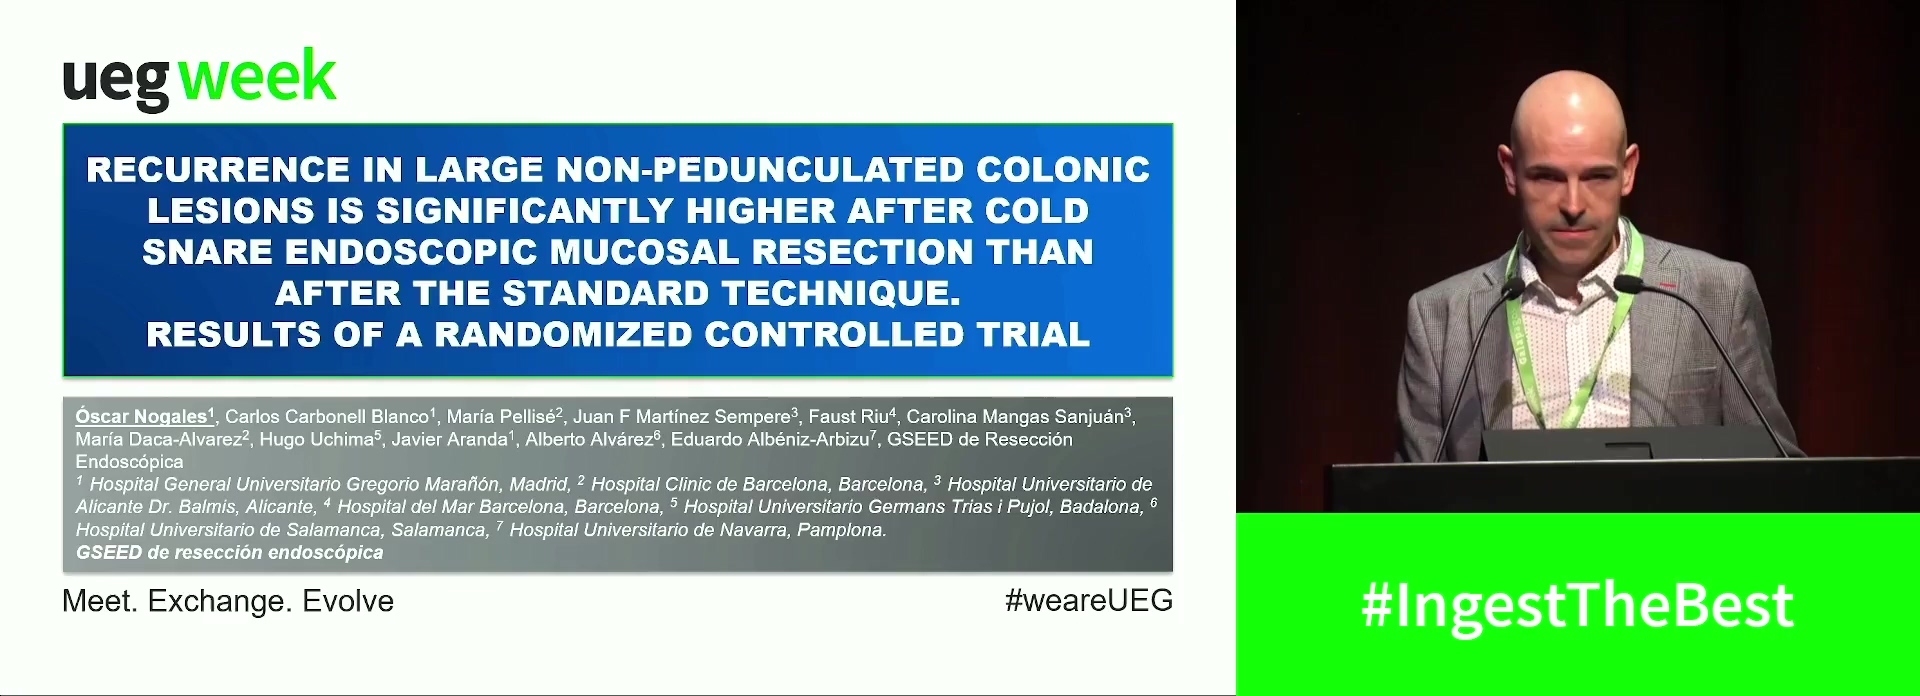 RECURRENCE IN LARGE NON-PEDUNCULATED COLONIC LESIONS IS SIGNIFICANTLY HIGHER AFTER COLD SNARE ENDOSCOPIC MUCOSAL RESECTION THAN AFTER THE STANDARD TECHNIQUE. RESULTS OF A RANDOMIZED CONTROLLED TRIAL